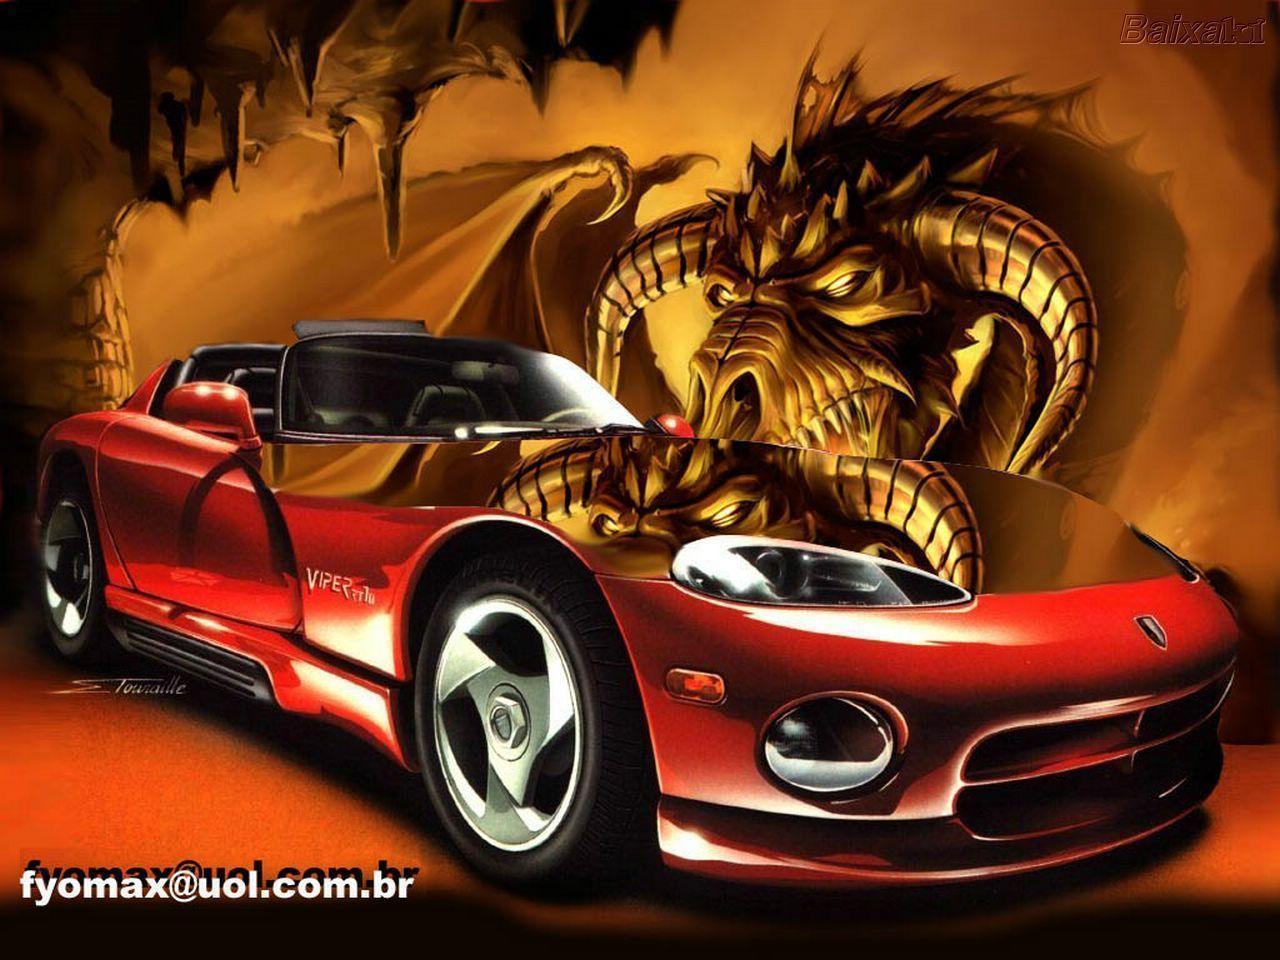 Viper Layout Car Dragon Wallpaper and Picture. Imageize: 170